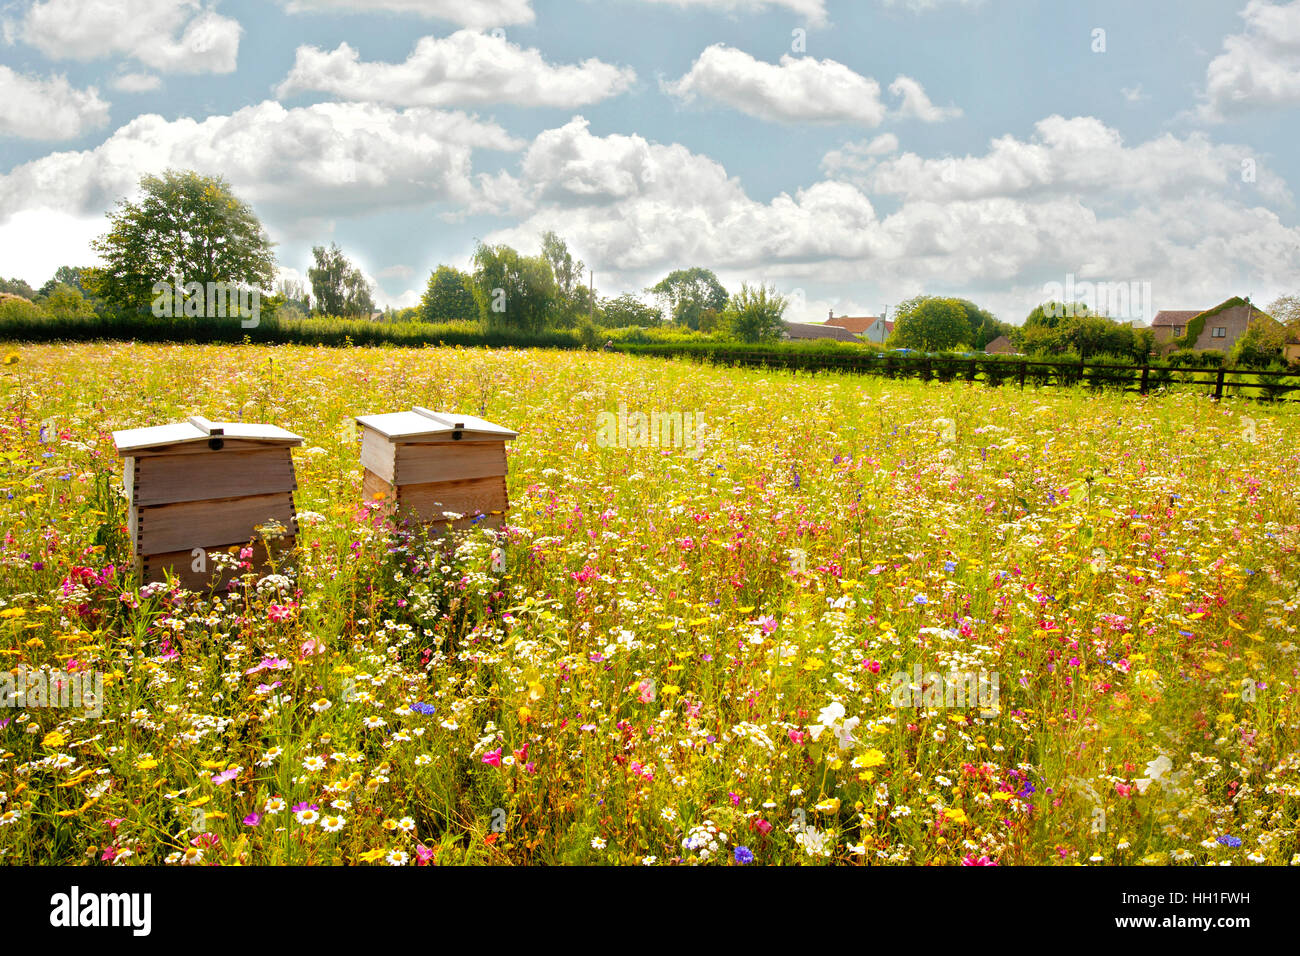 Bee Hives in a vibrant flower meadow with a blue sky and fluffy white clouds, Stock Photo